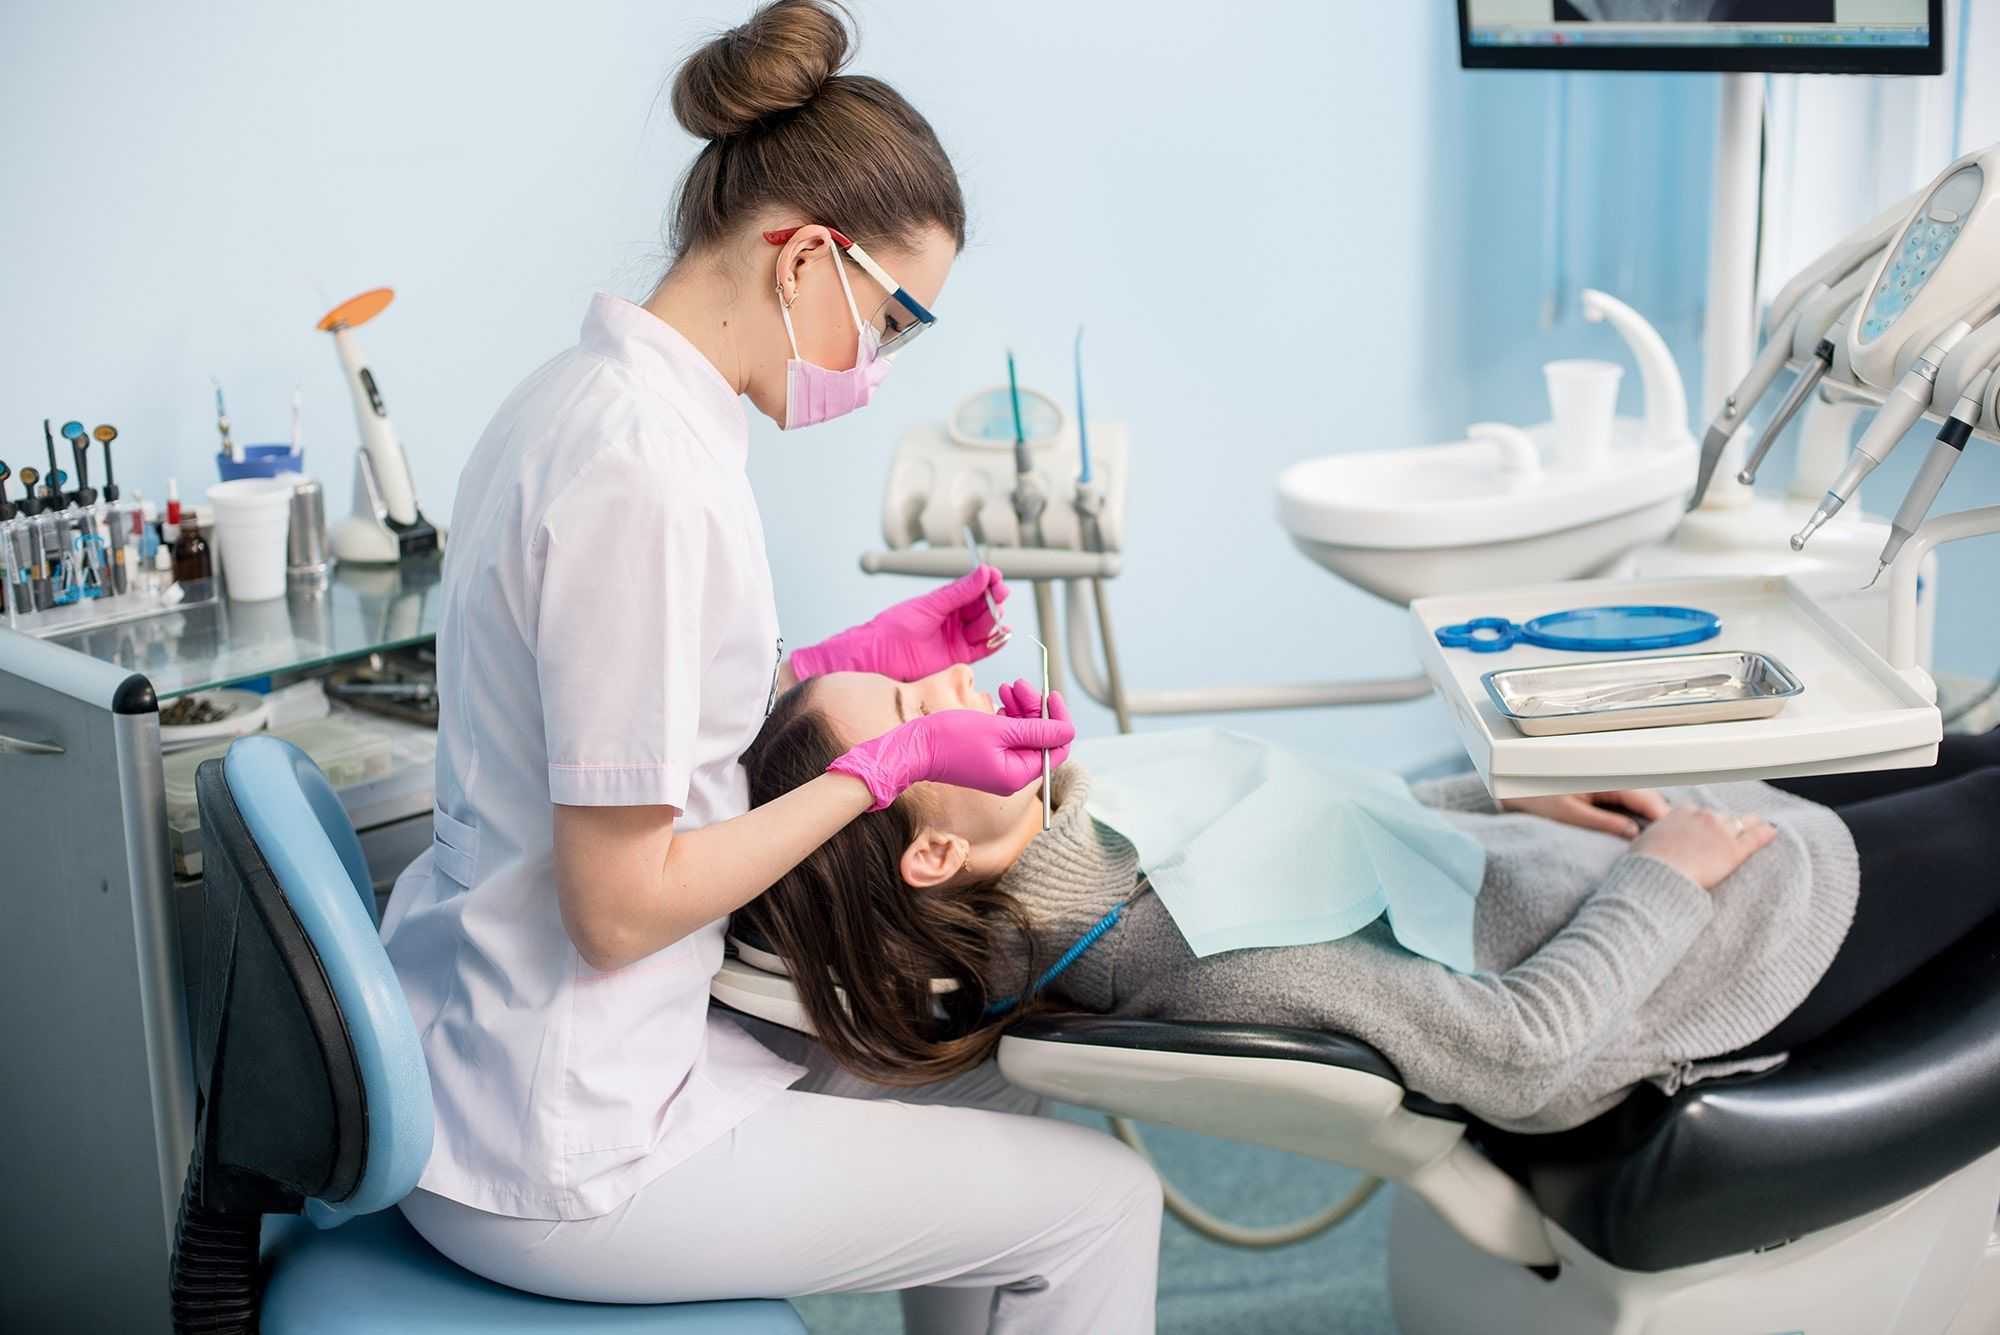 Is Dental Hygiene A Good Career? 12 Reasons It's For You 